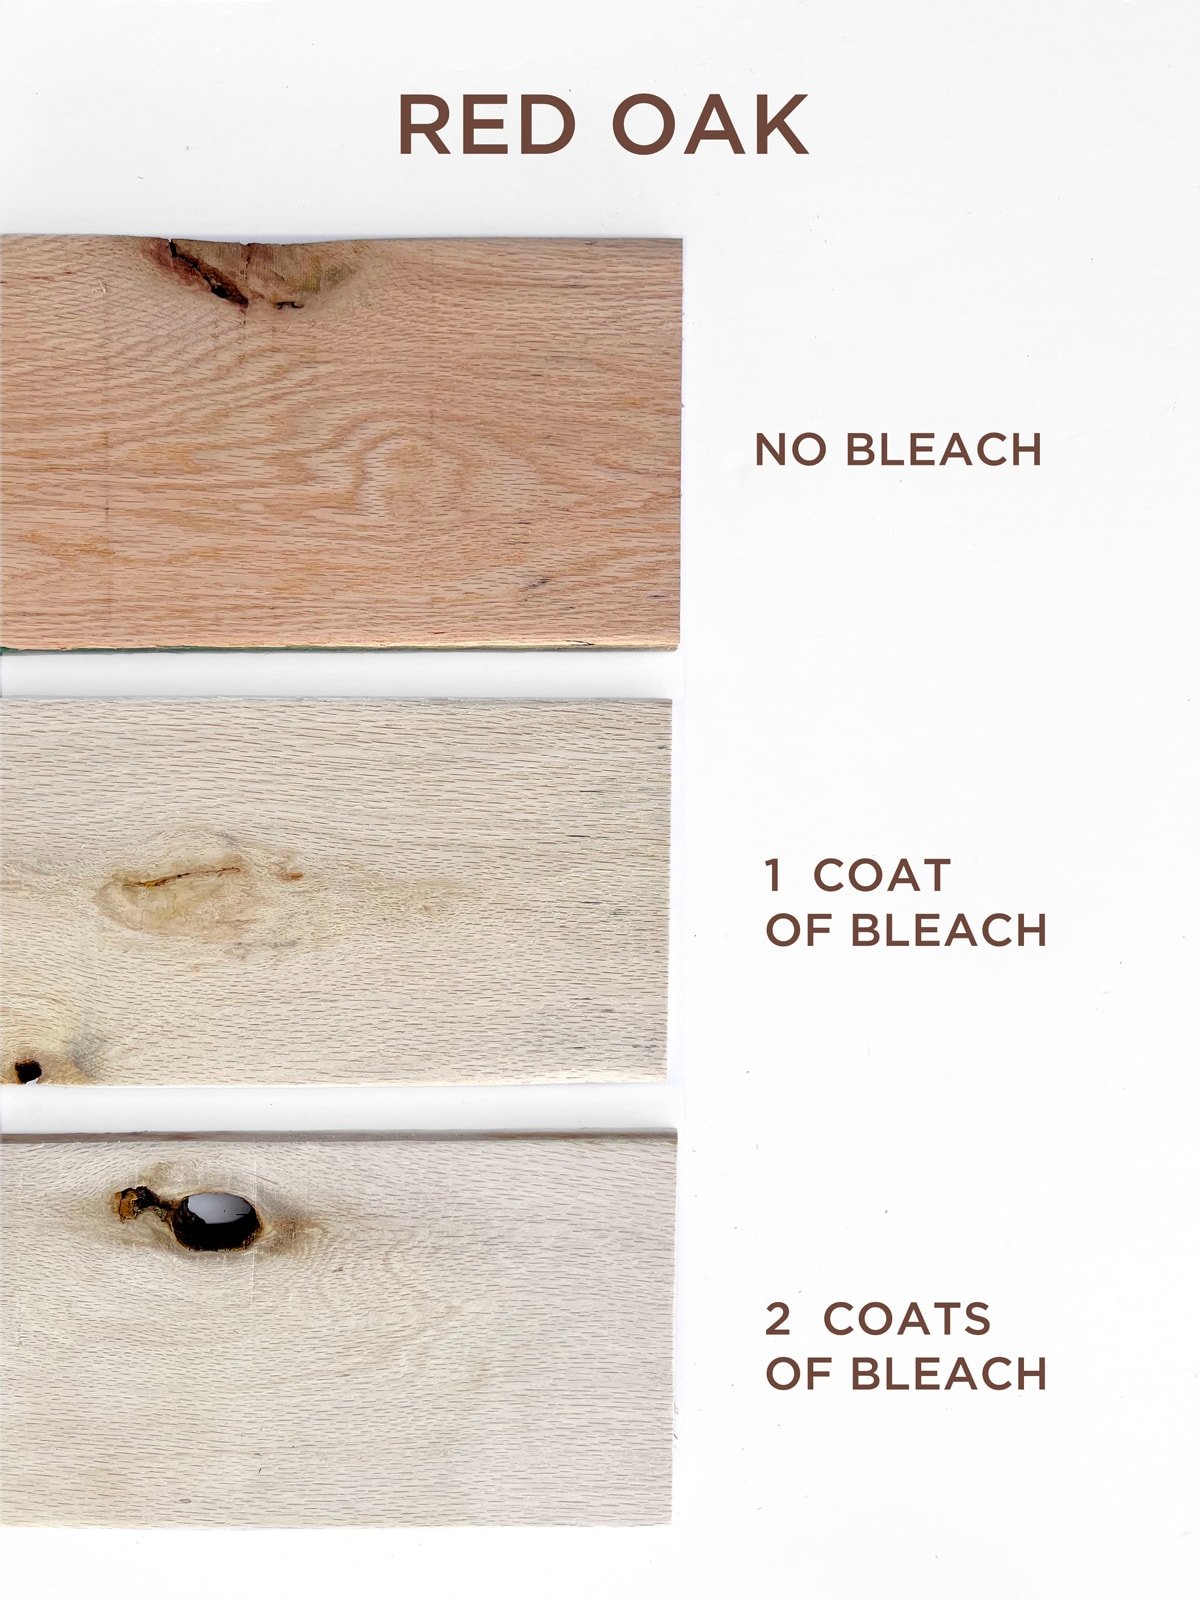 how to bleach red oak with wood bleach